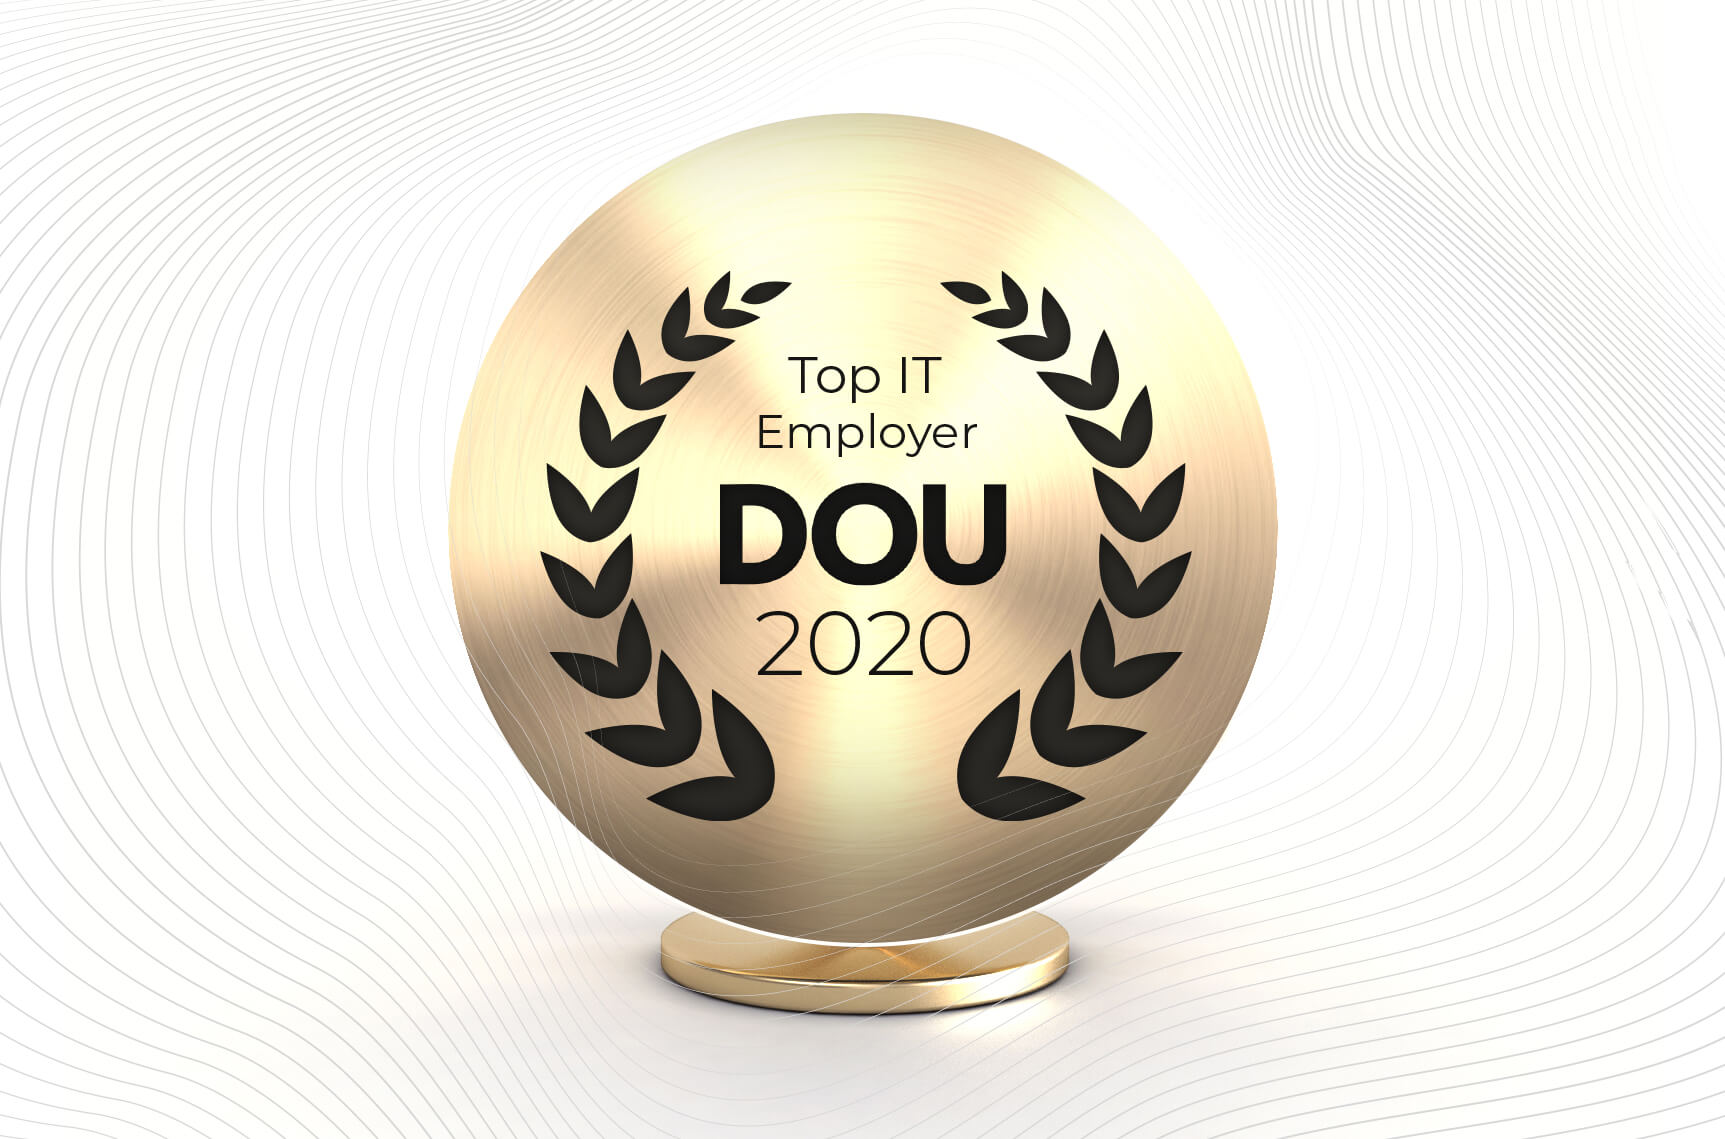 DOU names Symphony Solutions among Best IT Employers in Ukraine 2020